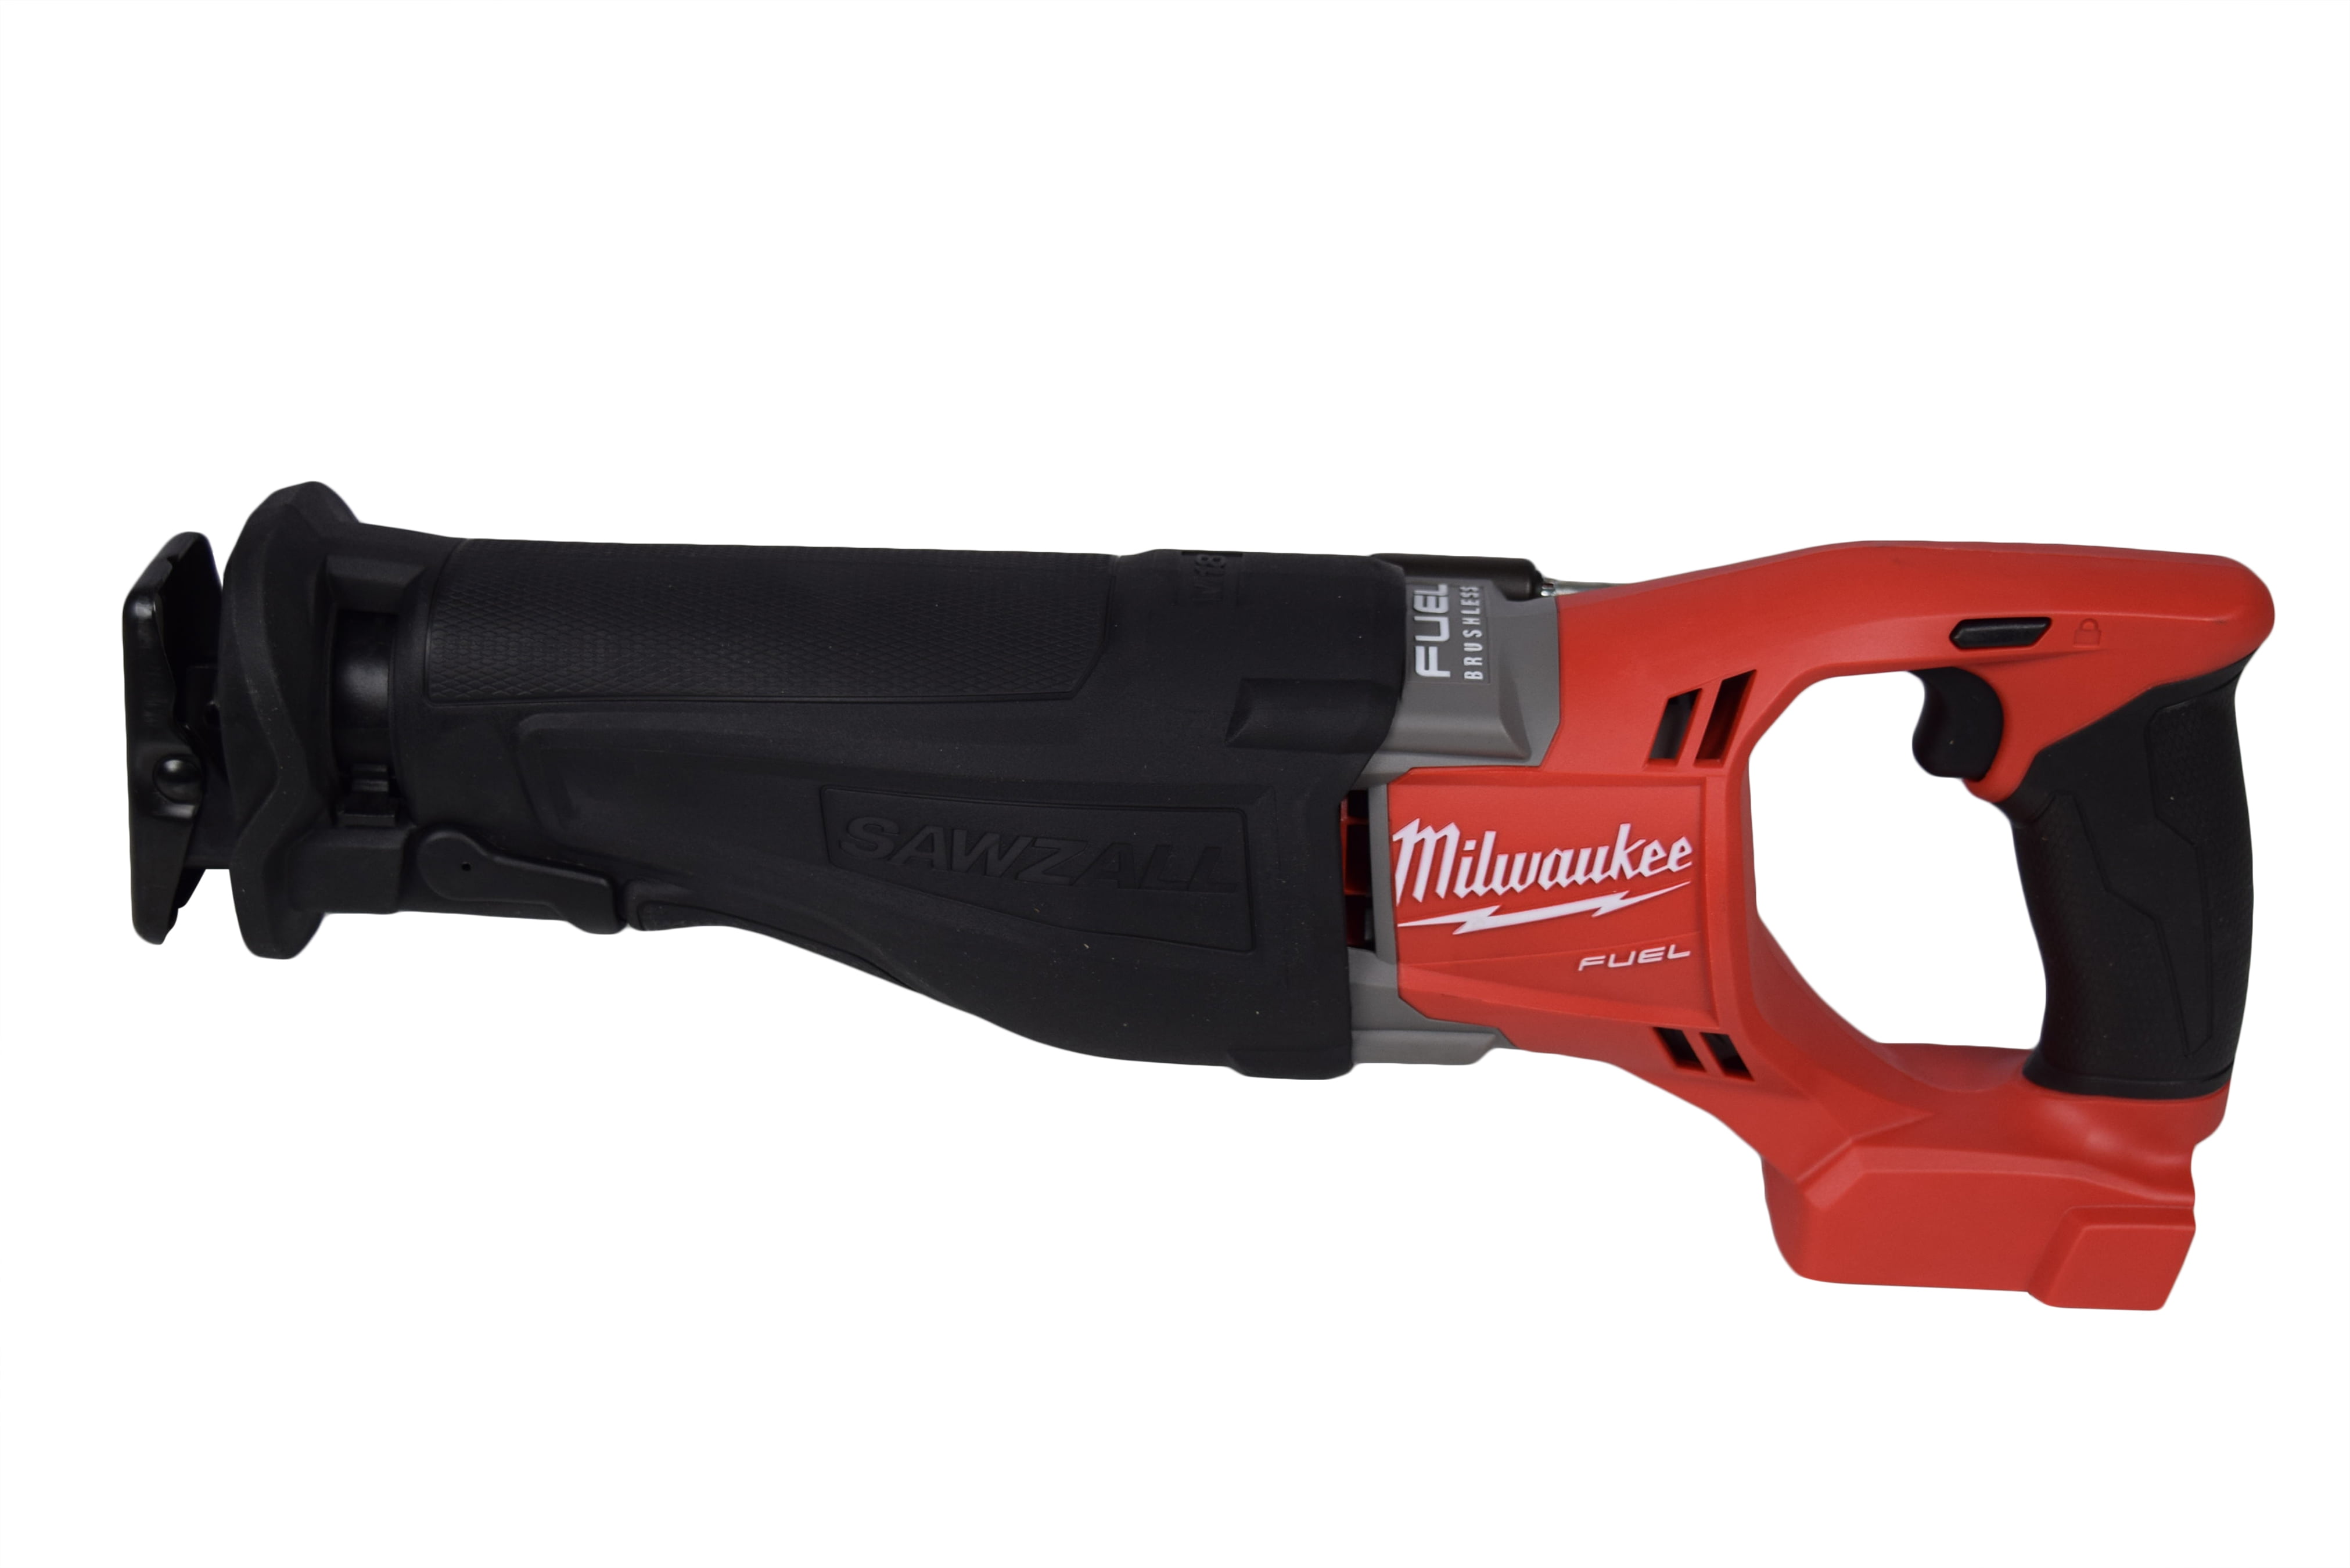 Milwaukee 2720-20 M18 FUEL Sawzall 18V Cordless Reciprocating Saw for sale online 